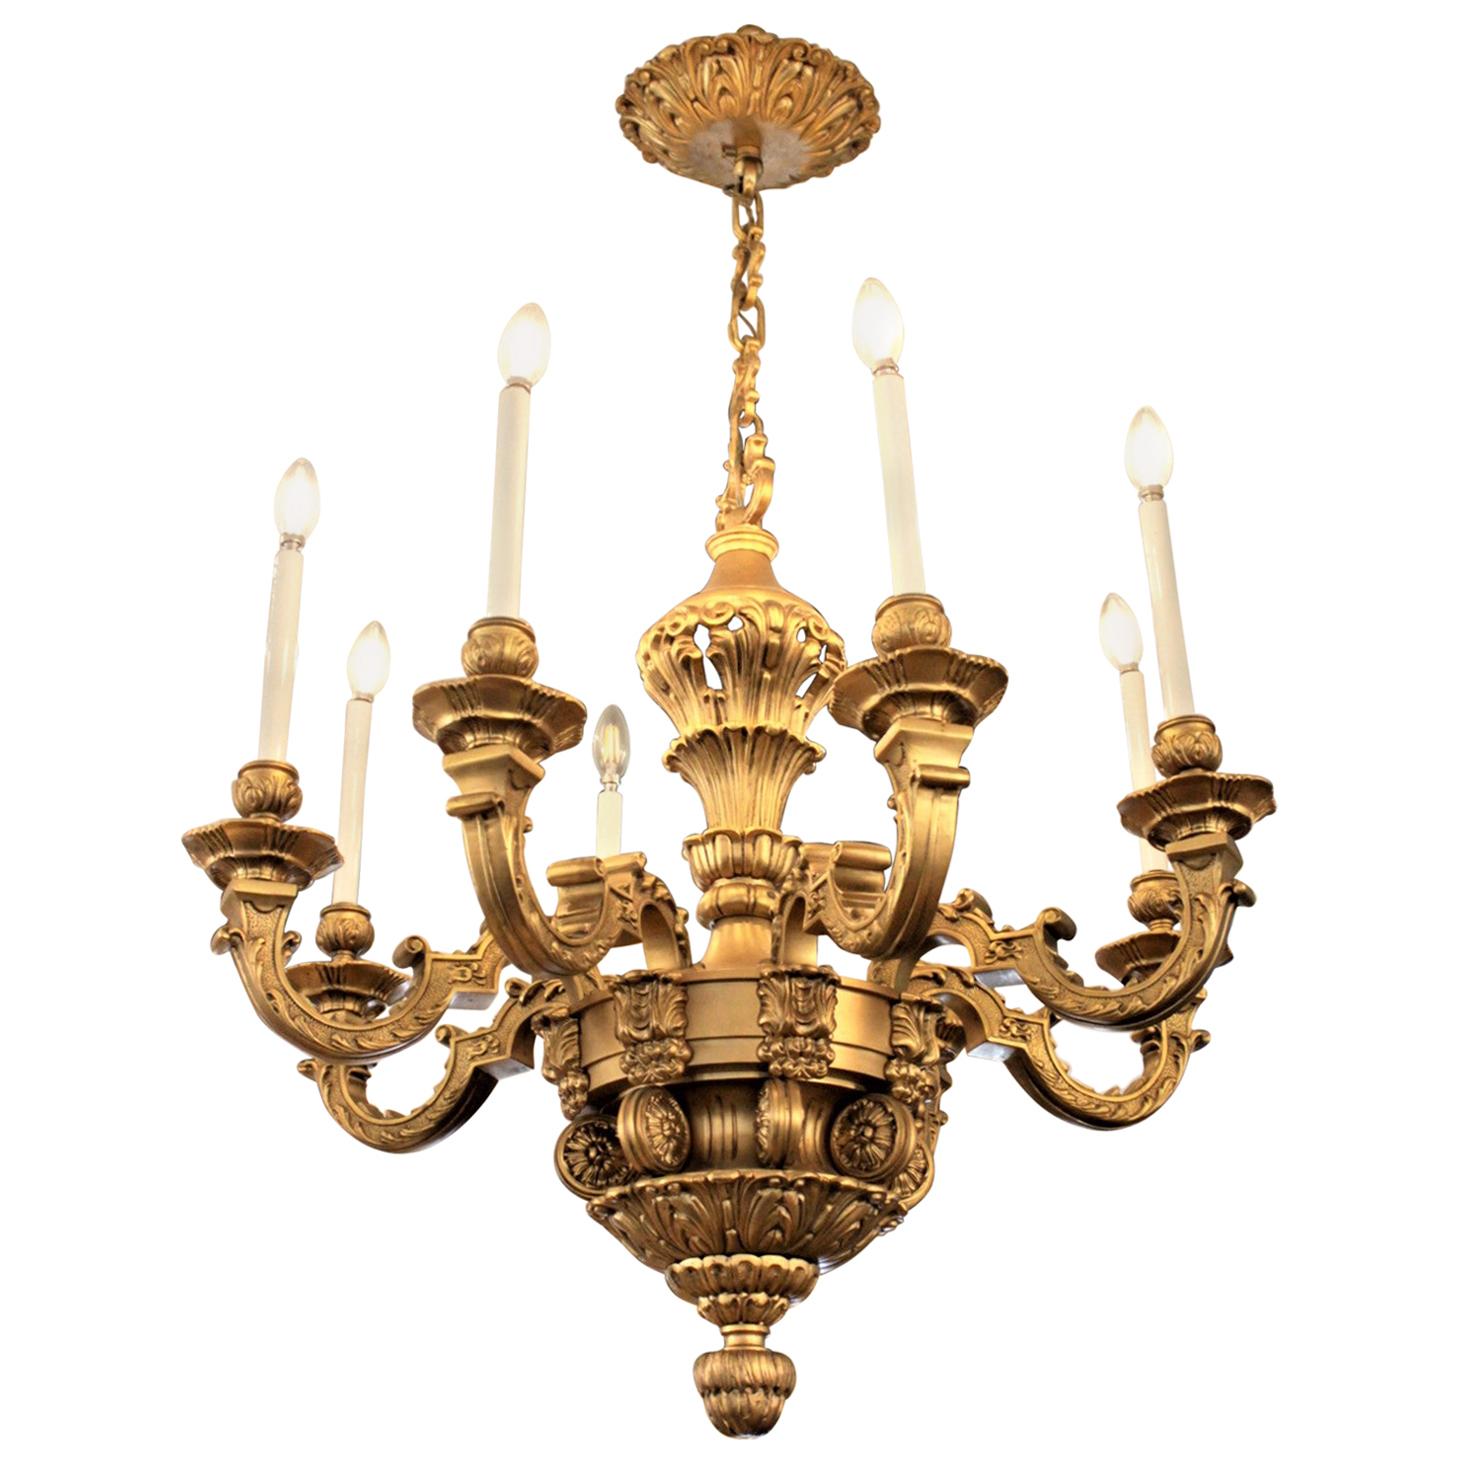 Large Antique Ornate French Louis XIV Boulle Style Gilt Bronze Chandelier For Sale